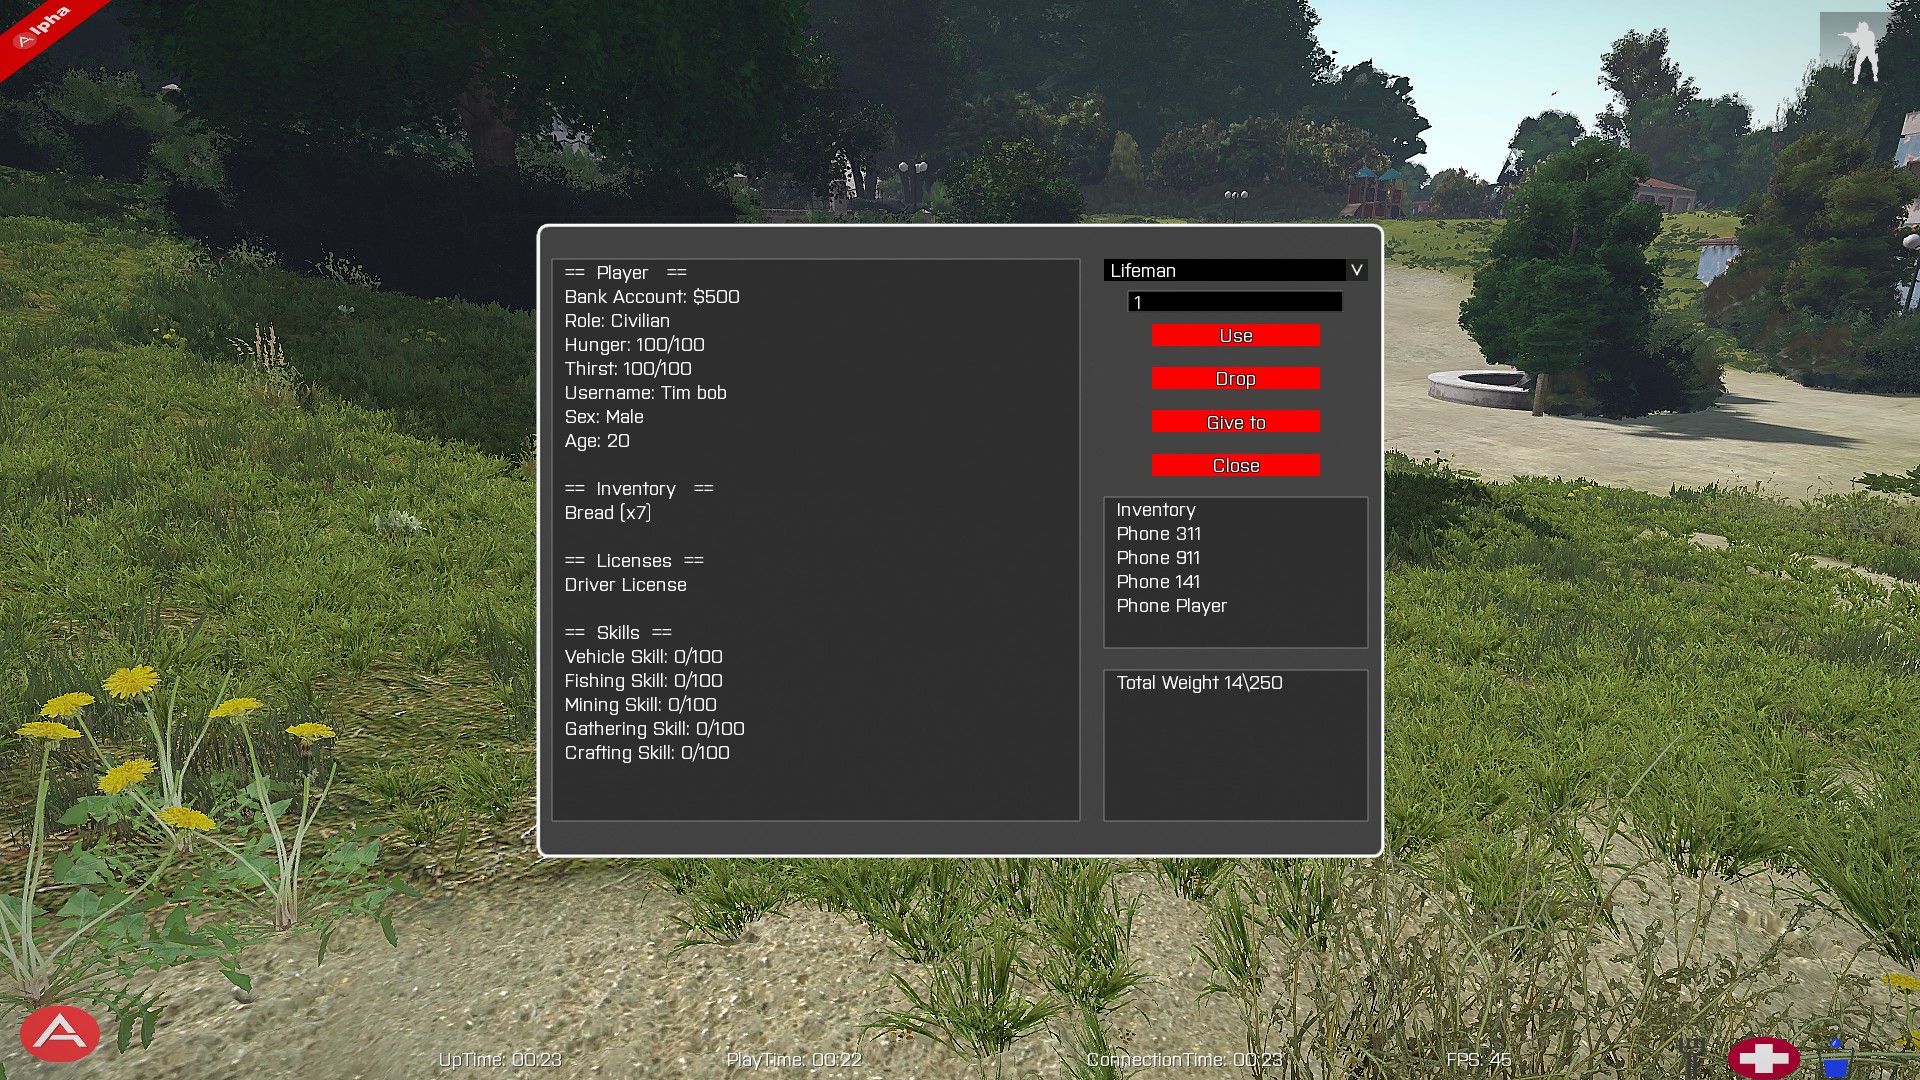 arma 3 server list with roles